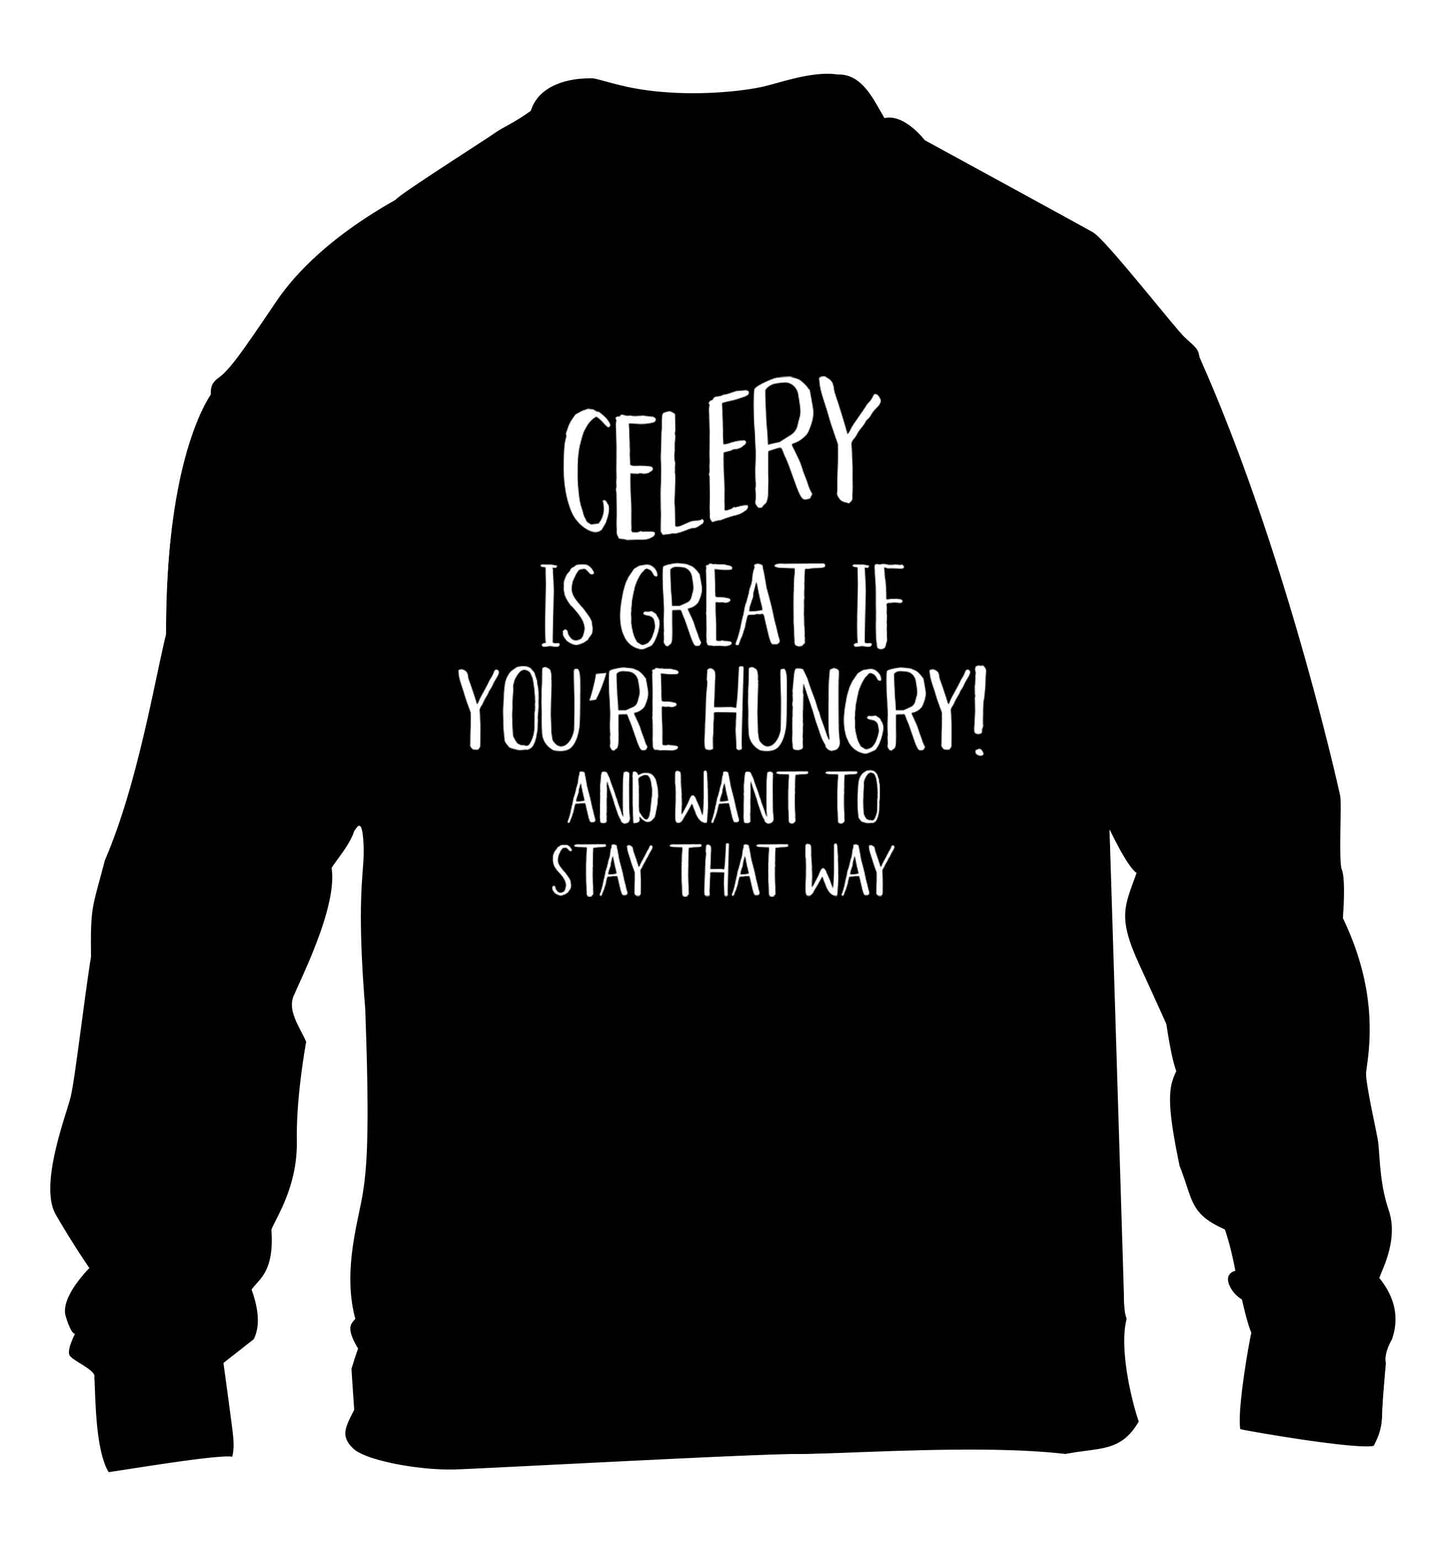 Cellery is great when you're hungry and want to stay that way children's black sweater 12-13 Years